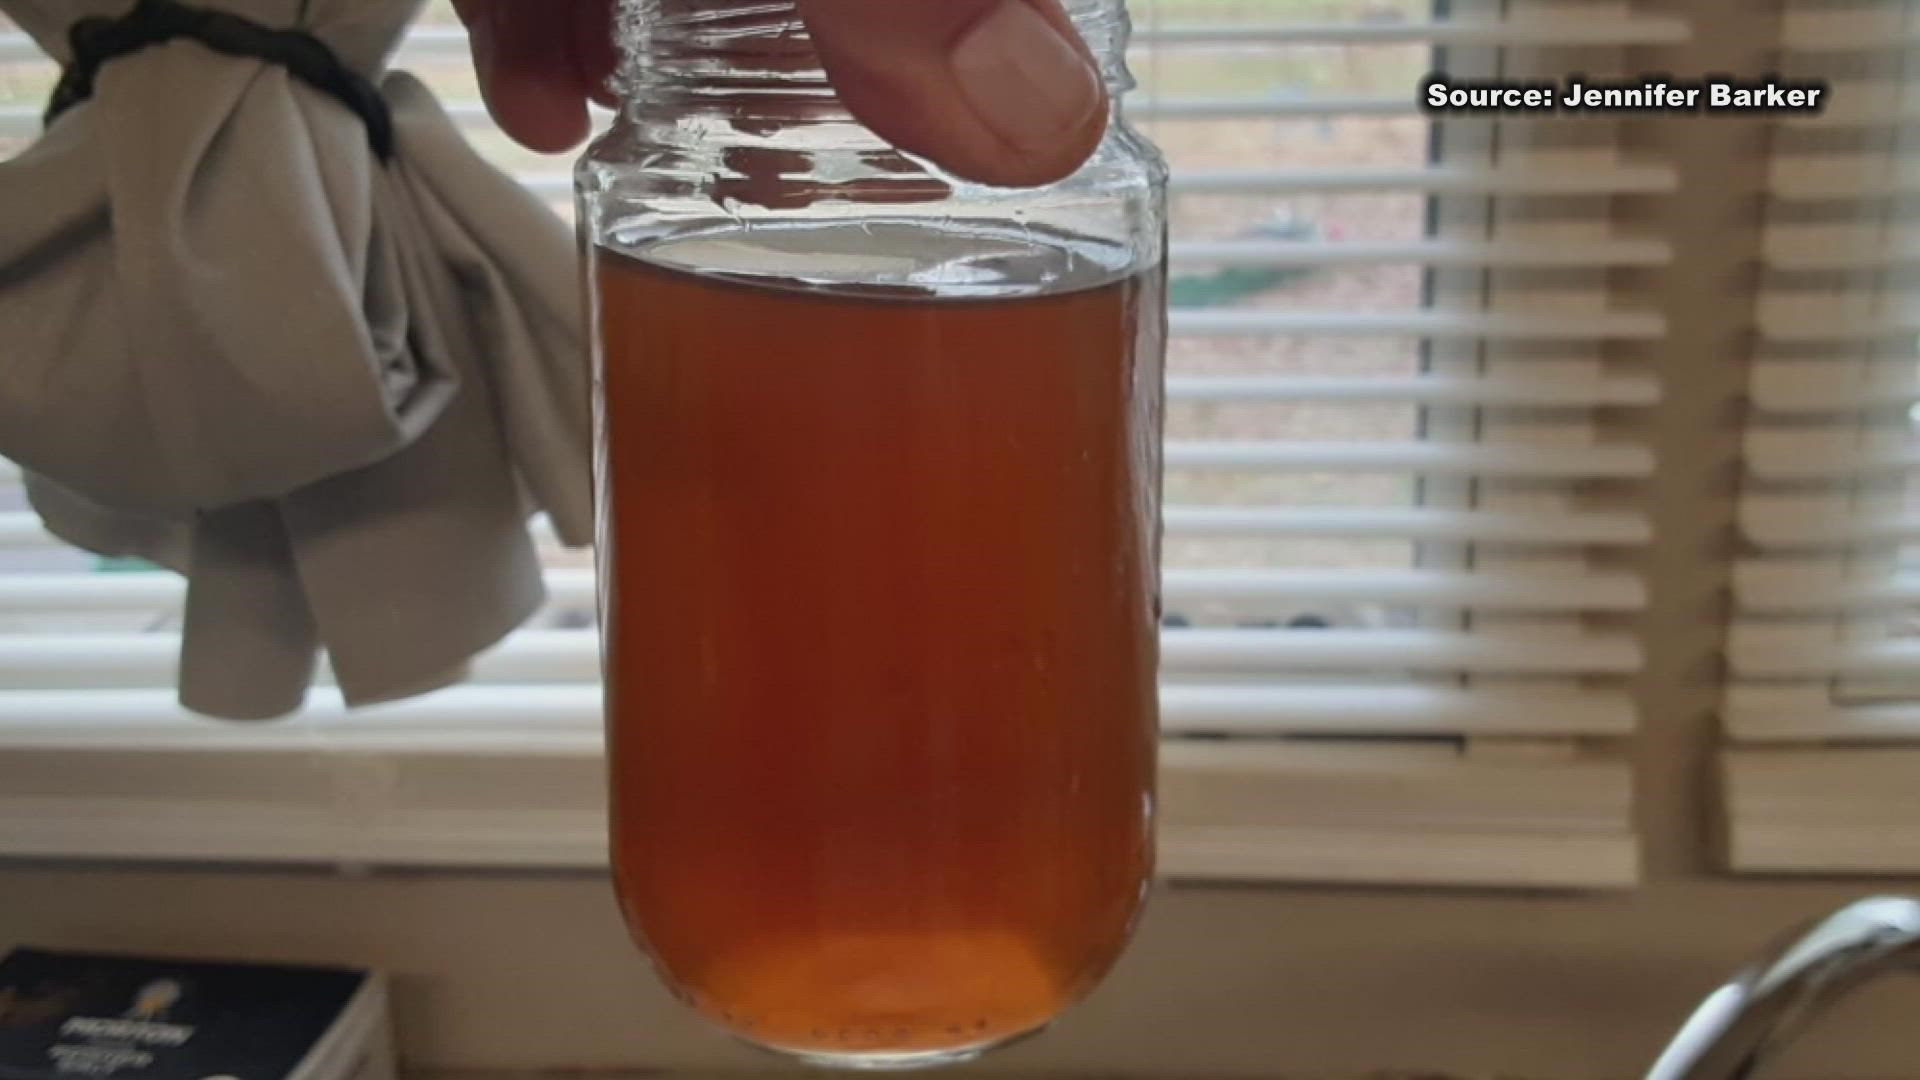 Some Ramseur residents say they've had brown water coming out of the faucets since Saturday.